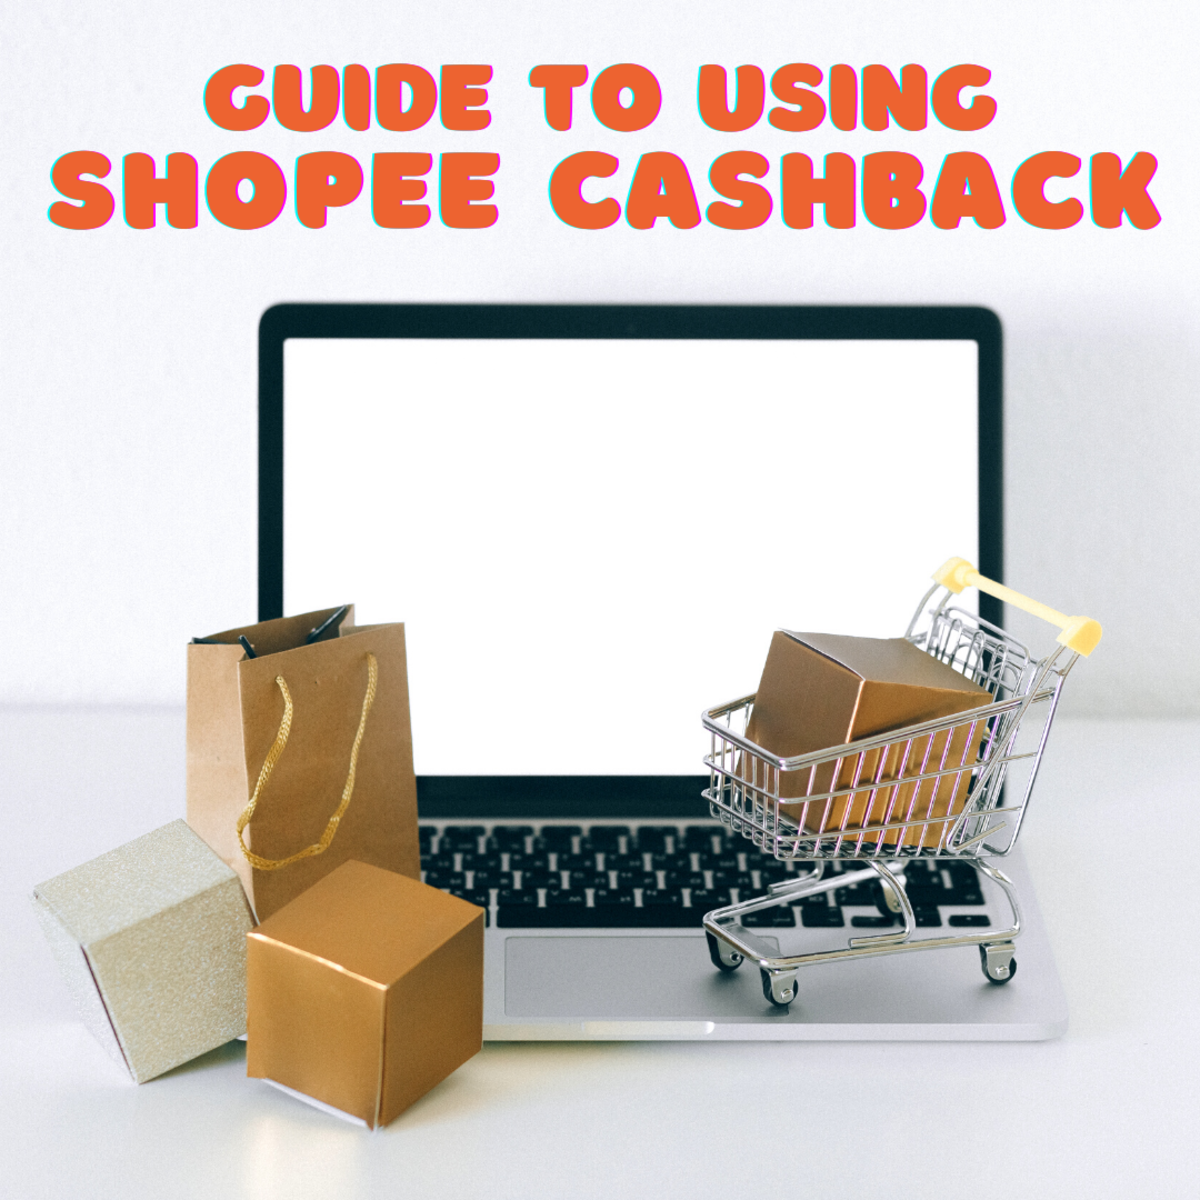 A comprehensive guide to using Shopee Cashback, including how to claim vouchers and a Shopee Cashback comparison table.